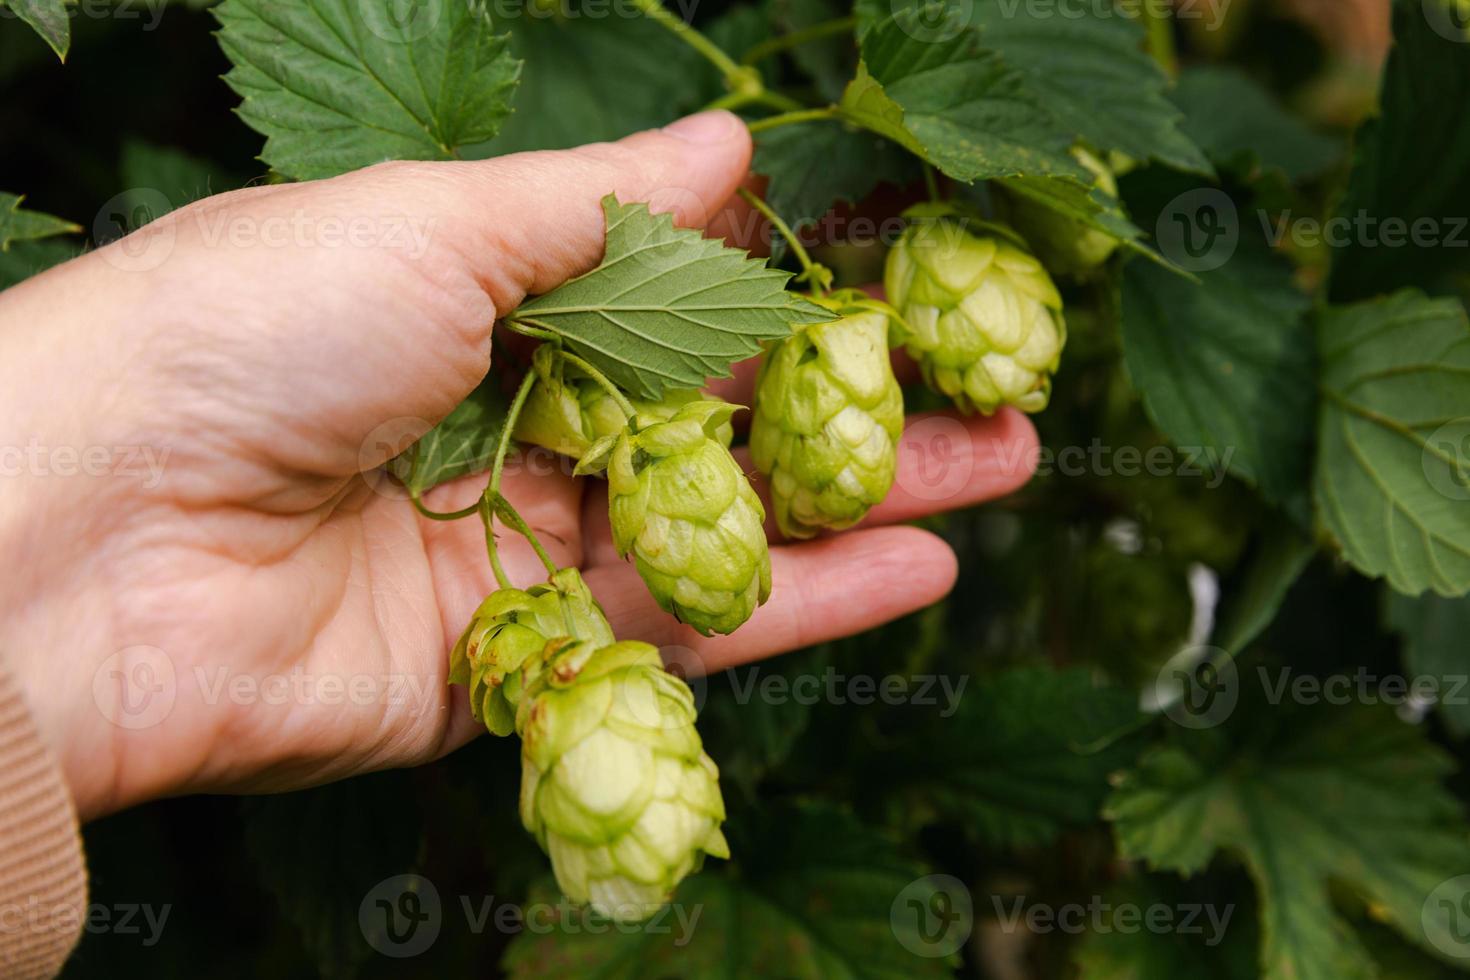 Farming and agriculture concept. Woman farm worker hand picking green fresh ripe organic hop cones for making beer and bread. Fresh hops for brewing production. Hop plant growing in garden or farm. photo